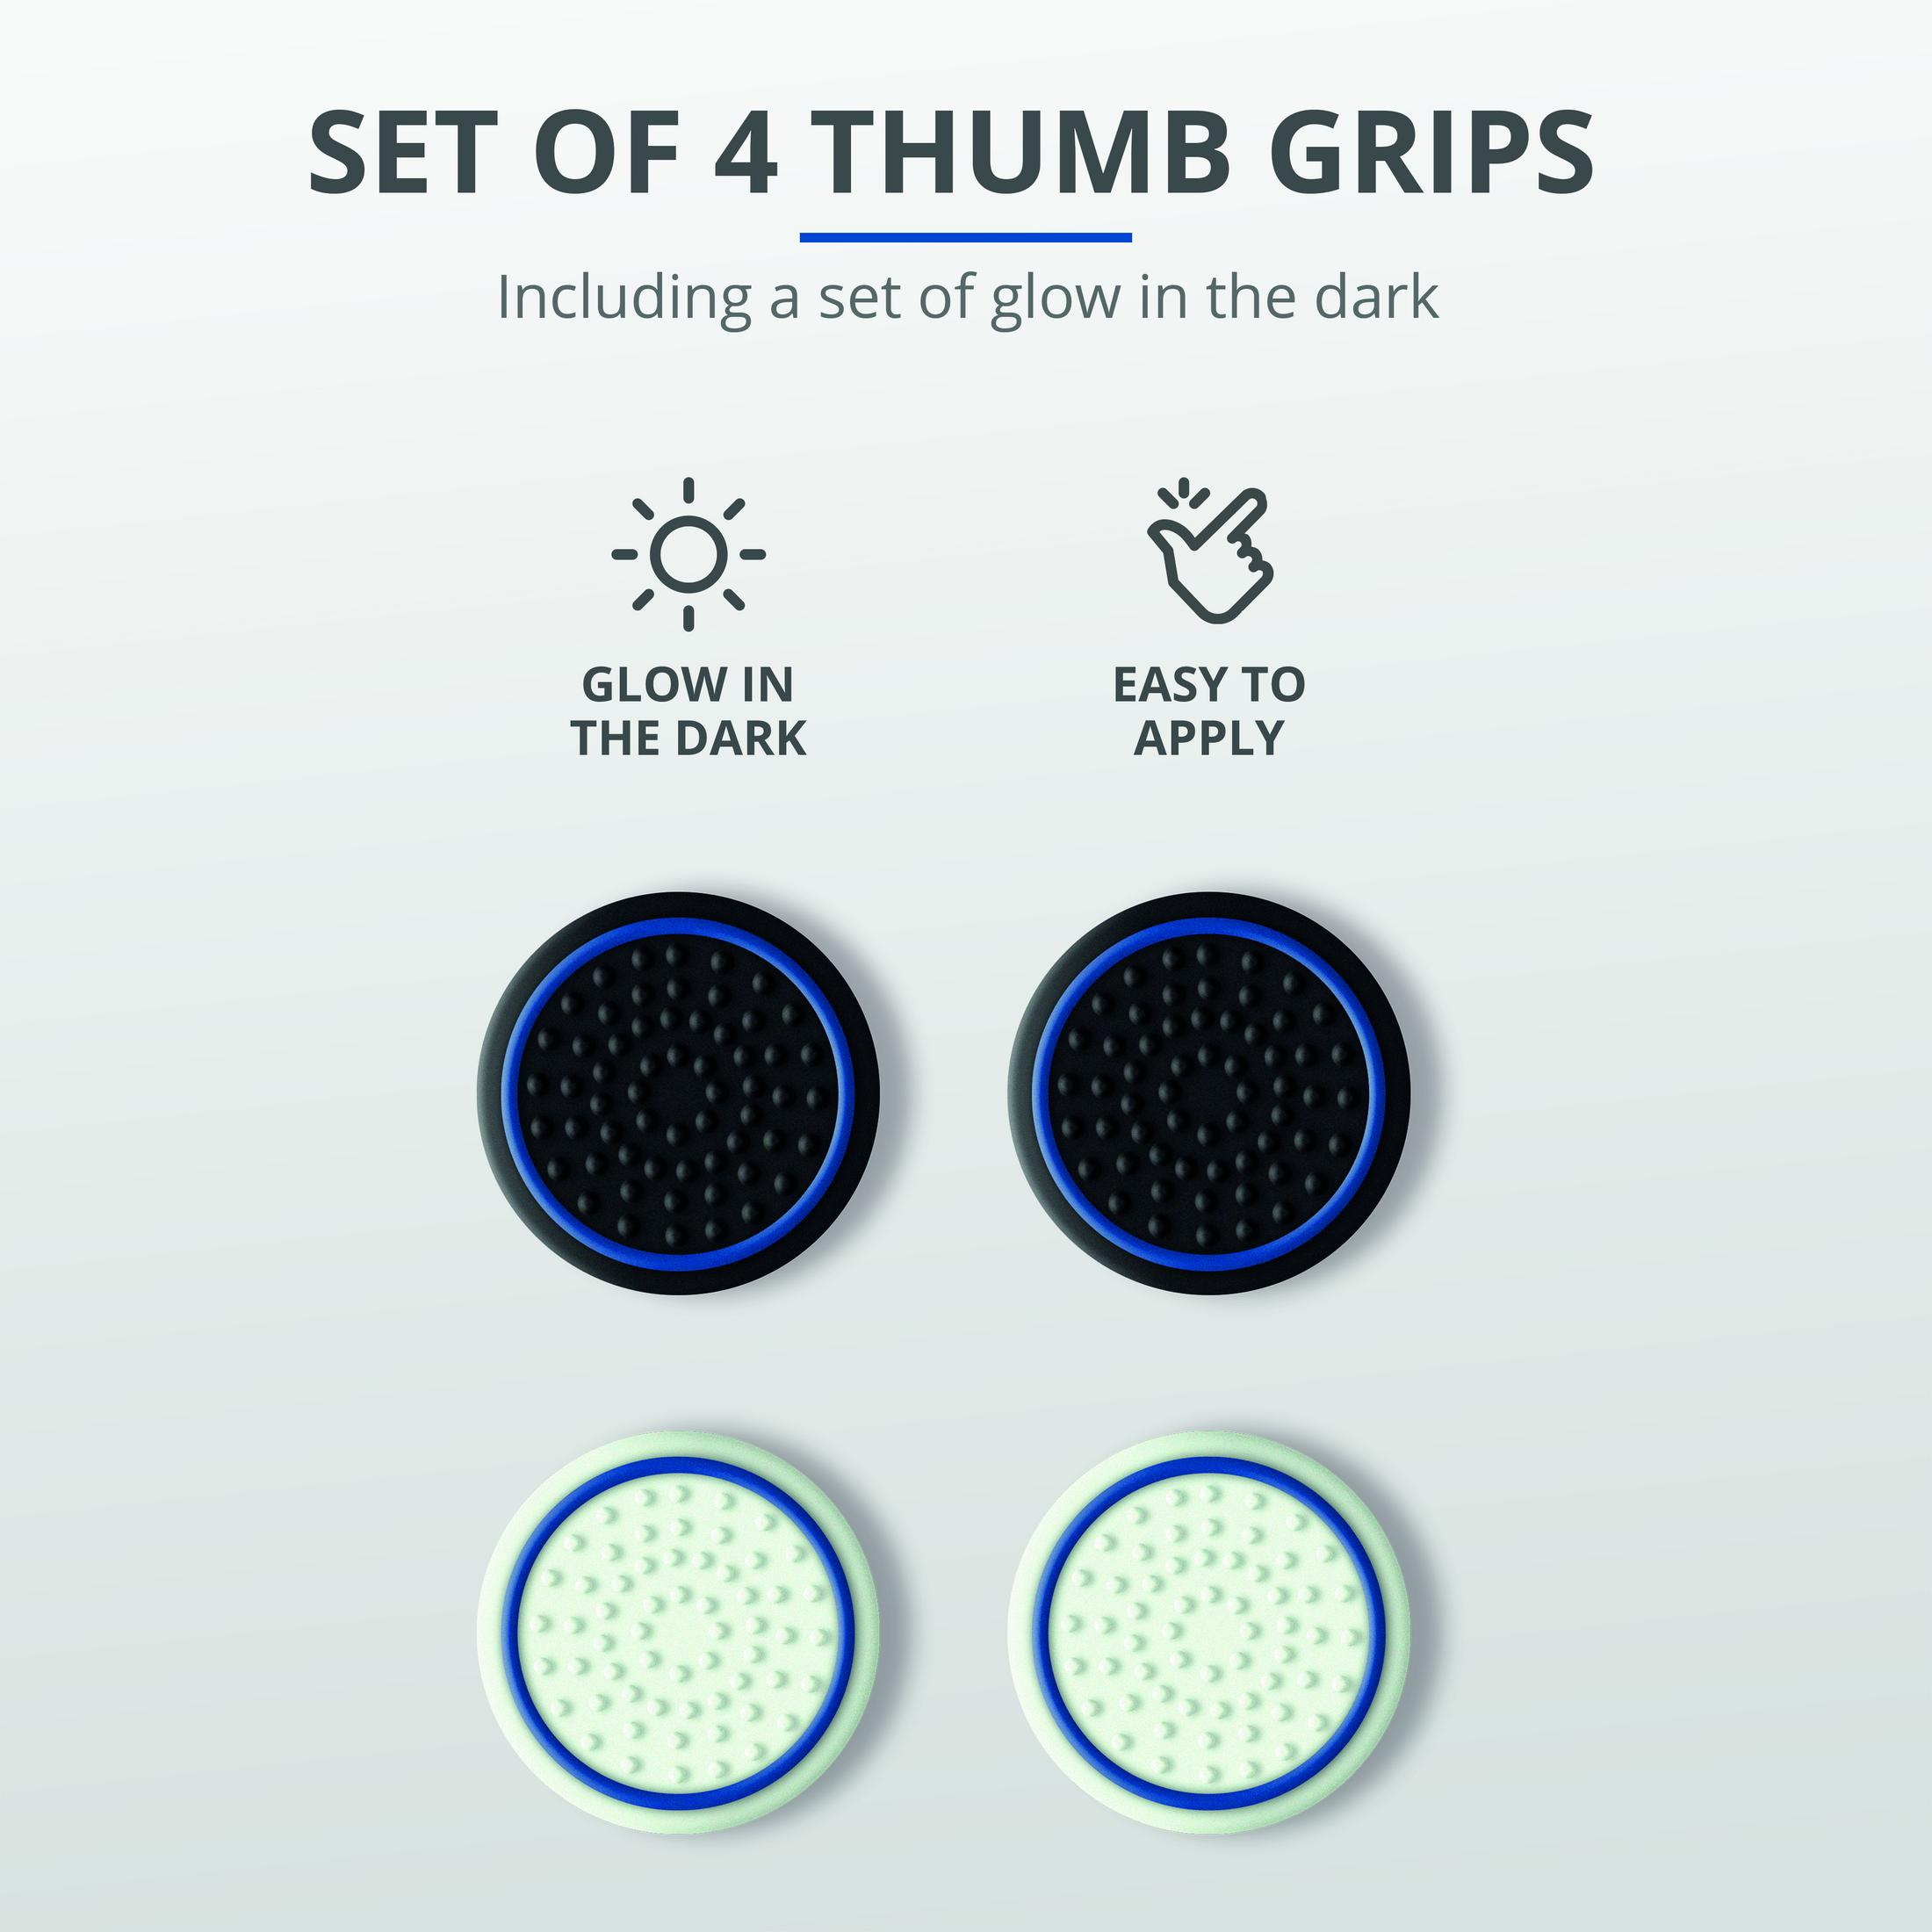 FOR Grips, Thumb Schwarz 4-PACK GRIPS TRUST 24170 PS5, GXT 266 THUMB